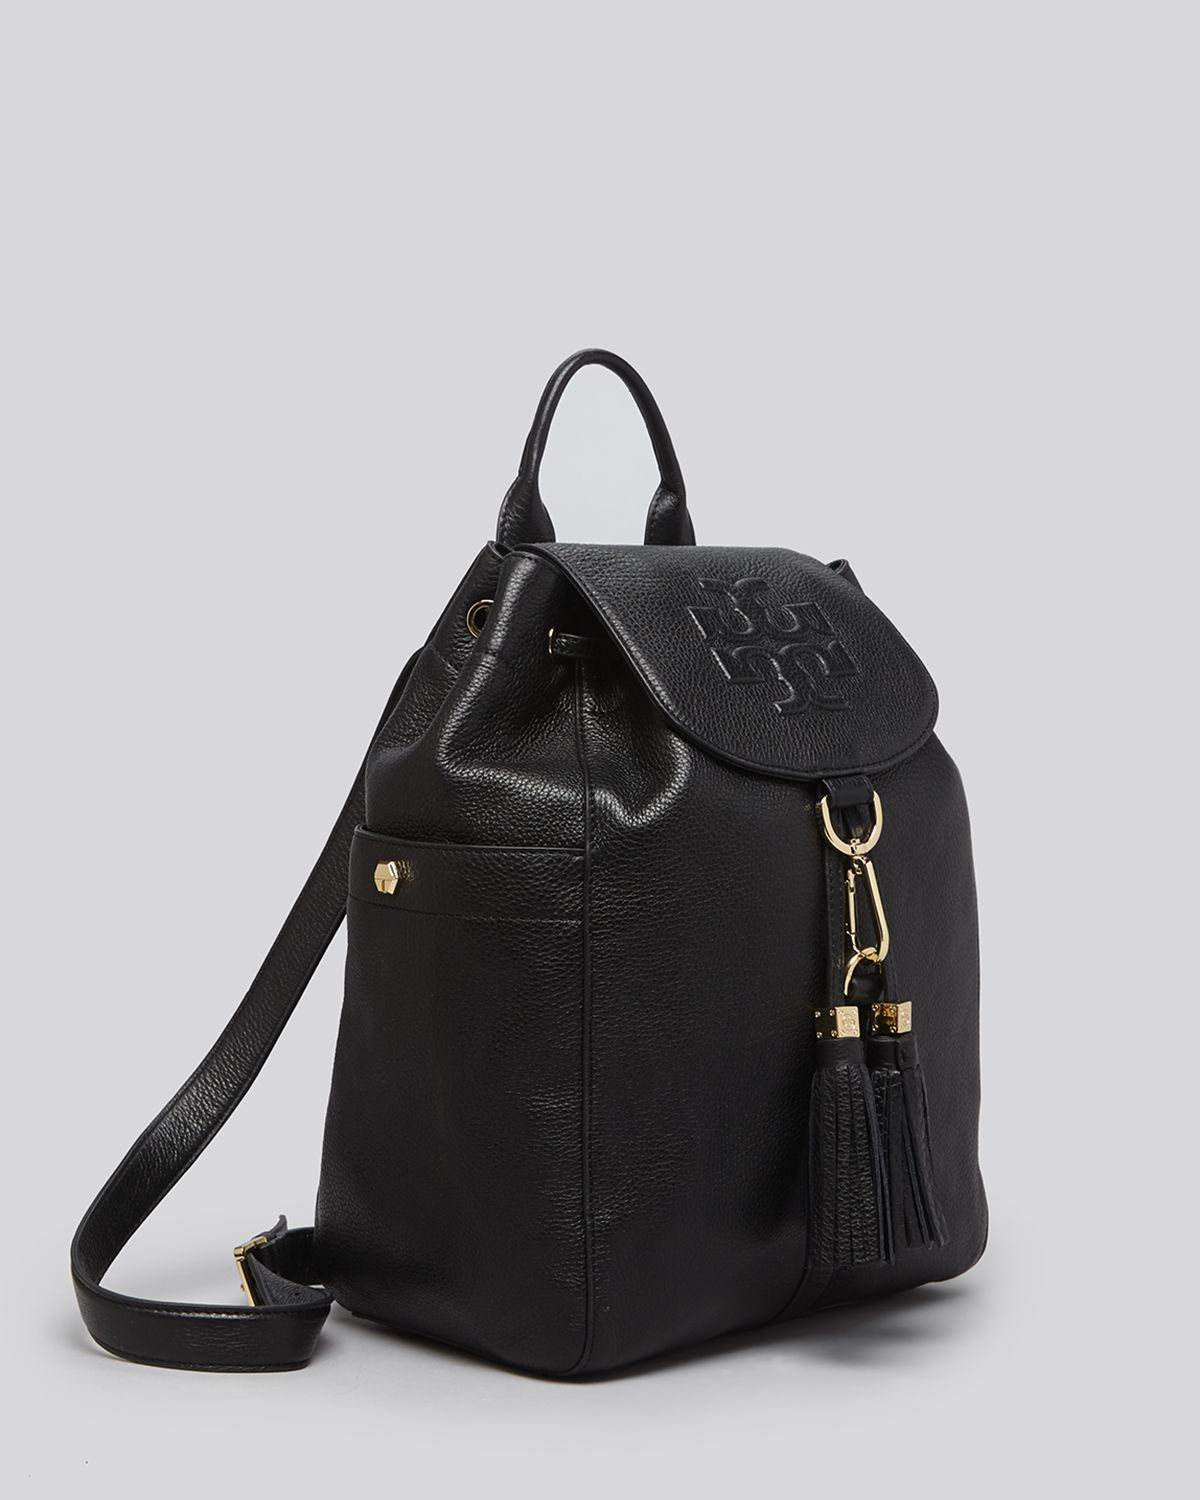 Lyst - Tory Burch Backpack - Thea in Black